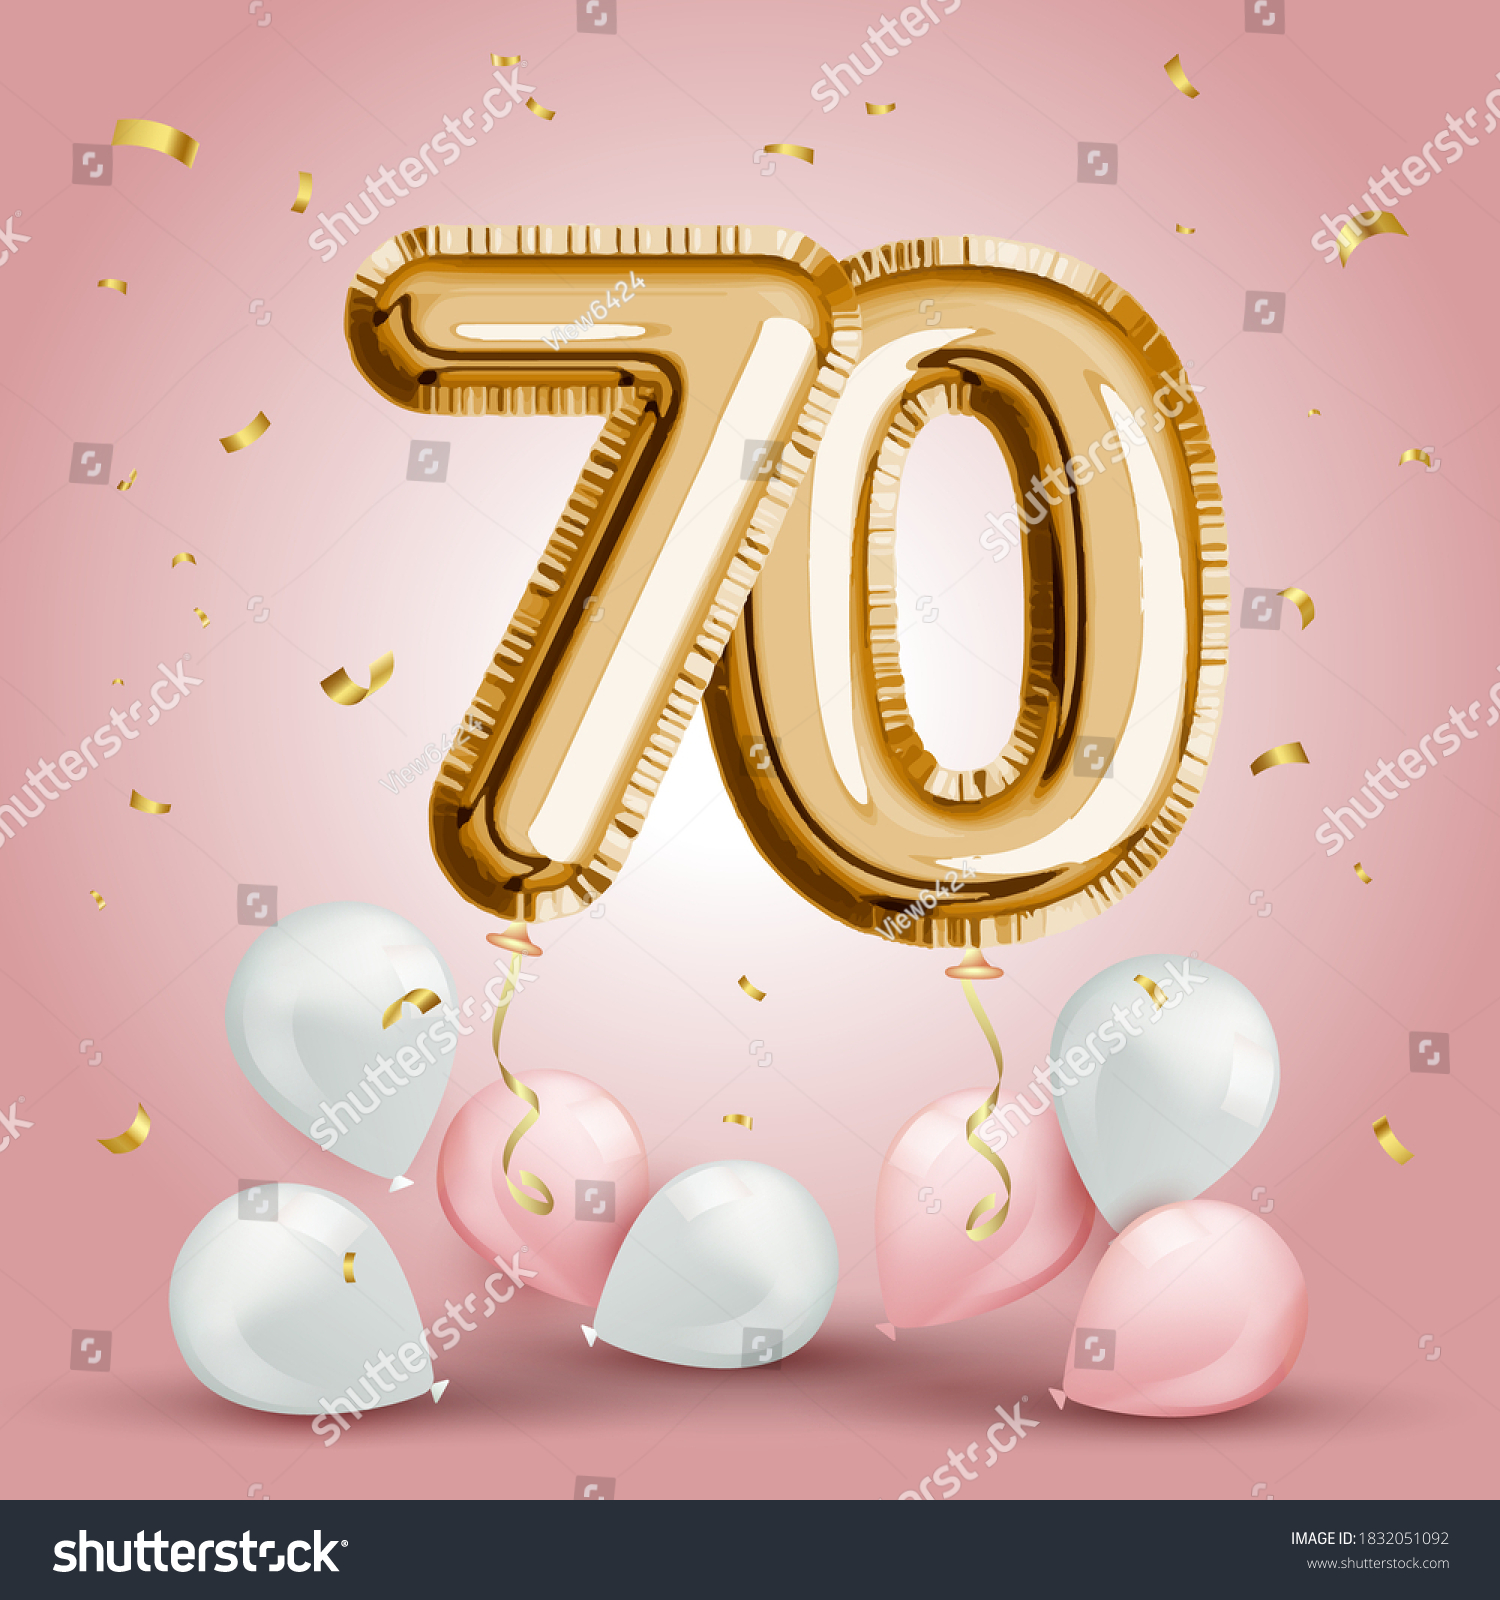 SVG of Elegant Greeting celebration seventy years birthday. Anniversary number 70 foil gold balloon. Happy birthday, congratulations poster. Golden numbers with sparkling golden confetti. Vector svg